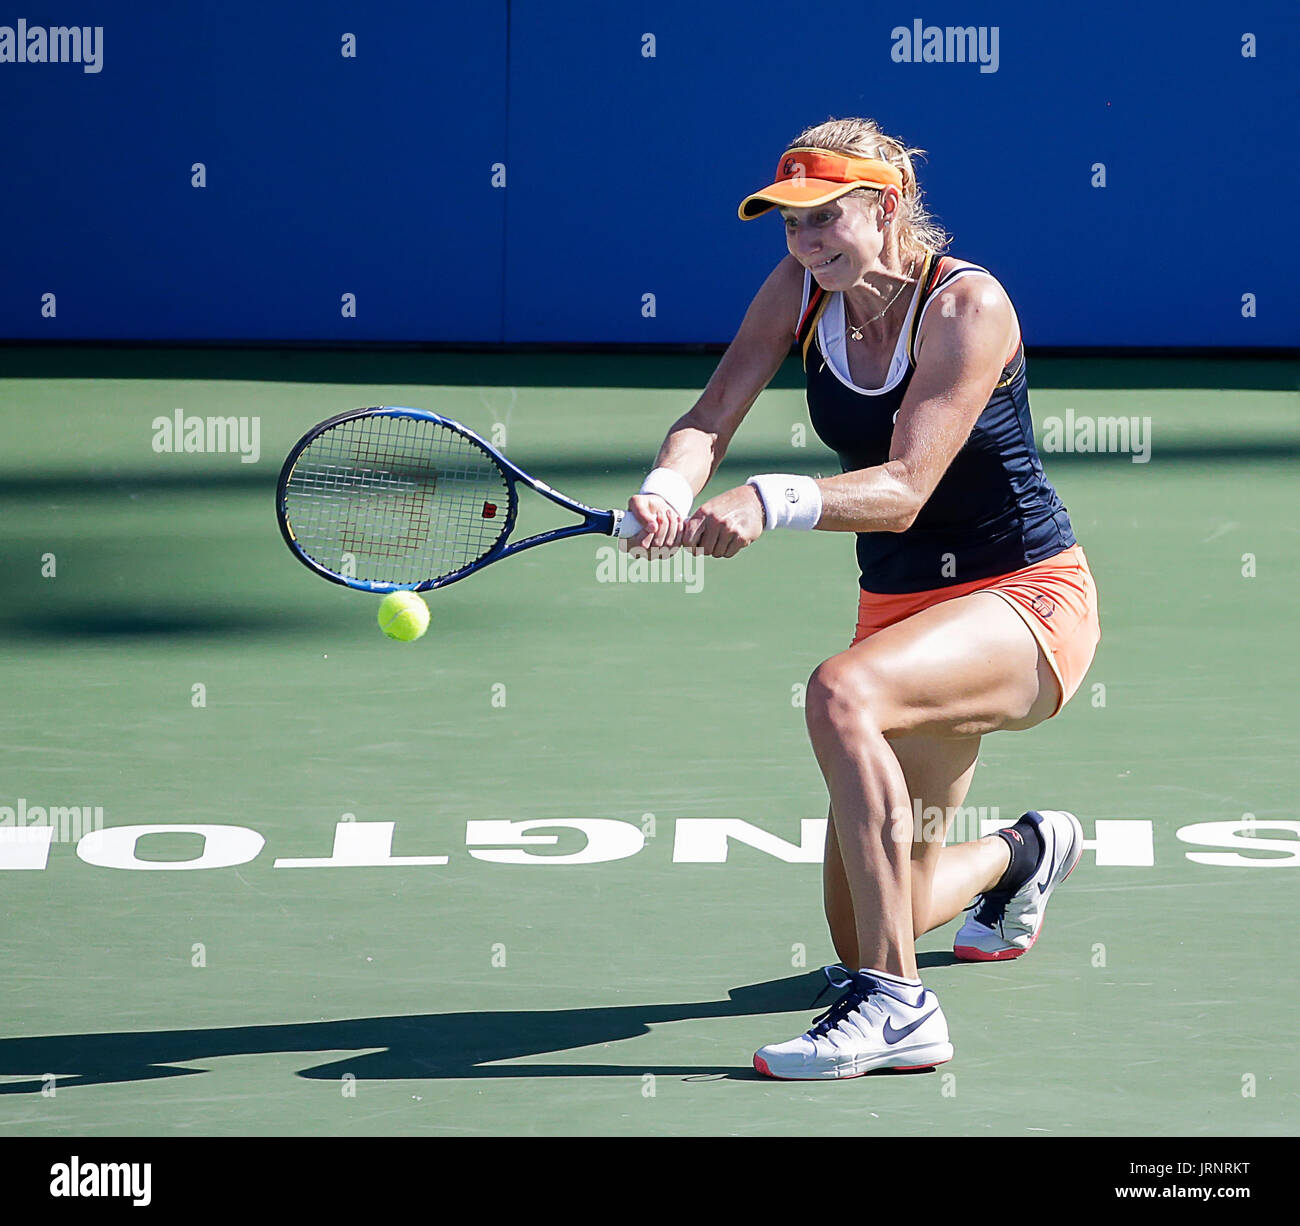 August 5, 2017: Ekaterina Makarova (RUS) gets down on a knee to play the ball back to Oceane Dodin (FRA) during a semi final match at the 2017 Citi Open tennis tournament being played at Rock Creek Park Tennis Center in Washington, DC Justin Cooper/CSM Stock Photo